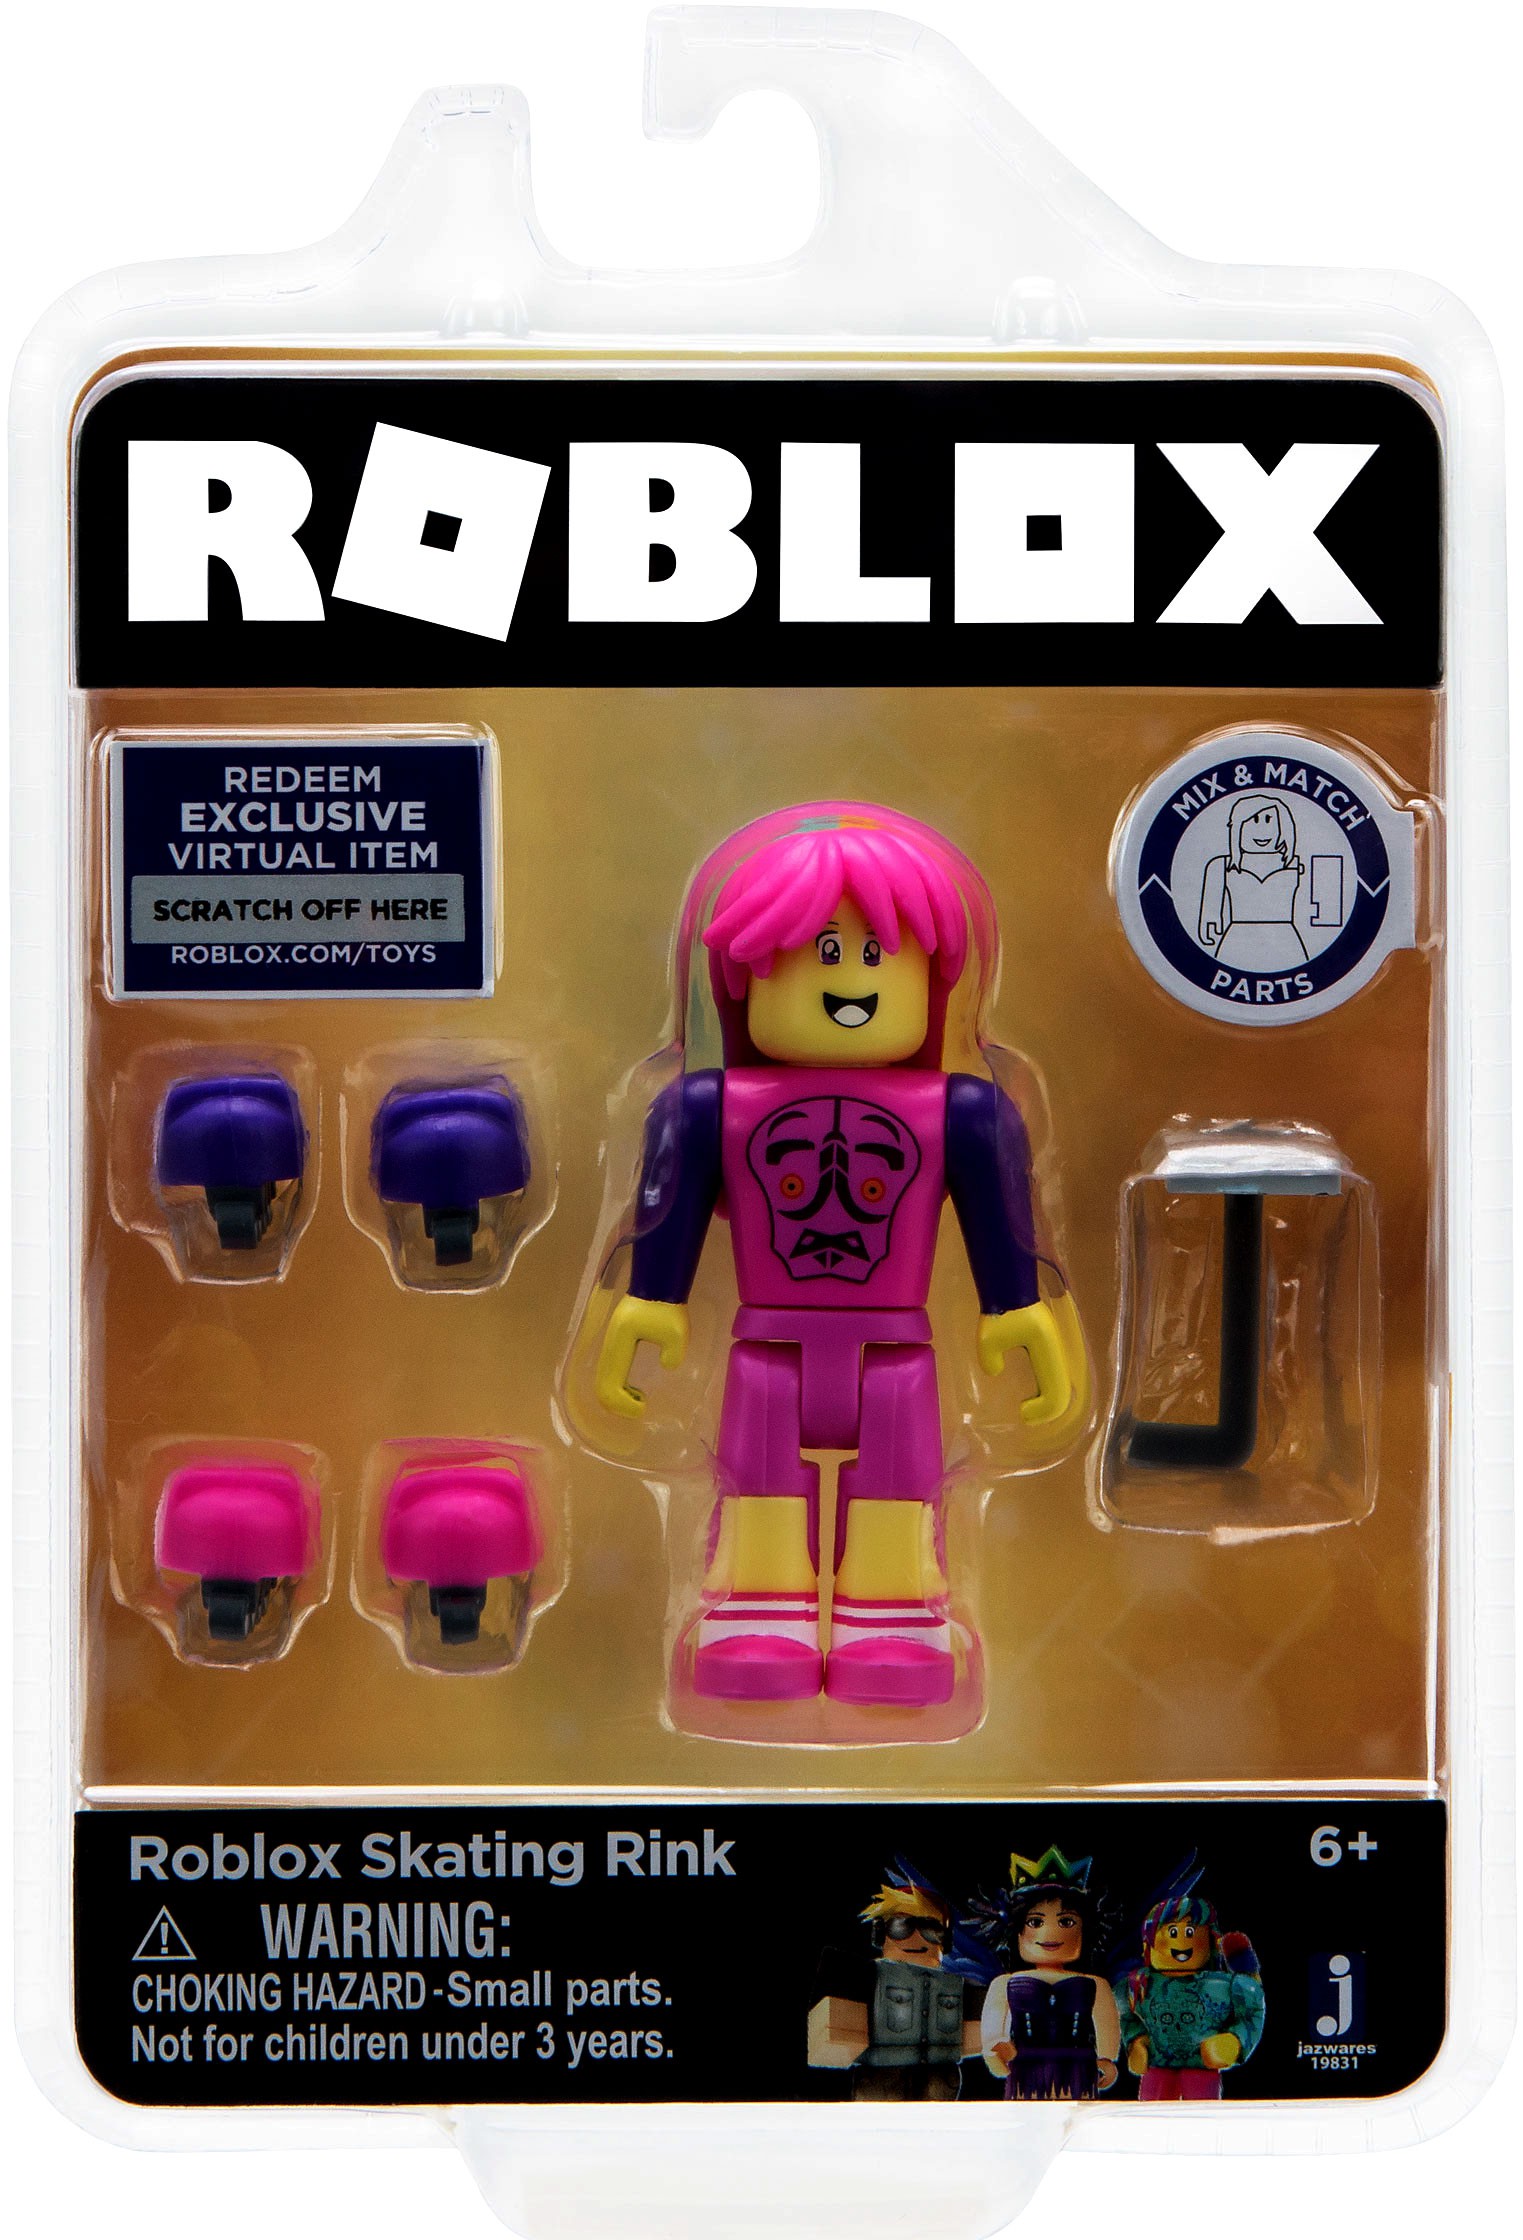 Celebrity Collection Roblox Skating Rink Action Figure 681326198314 Ebay - roblox celebrity collection roblox skating rink 3 action figure jazwares toywiz